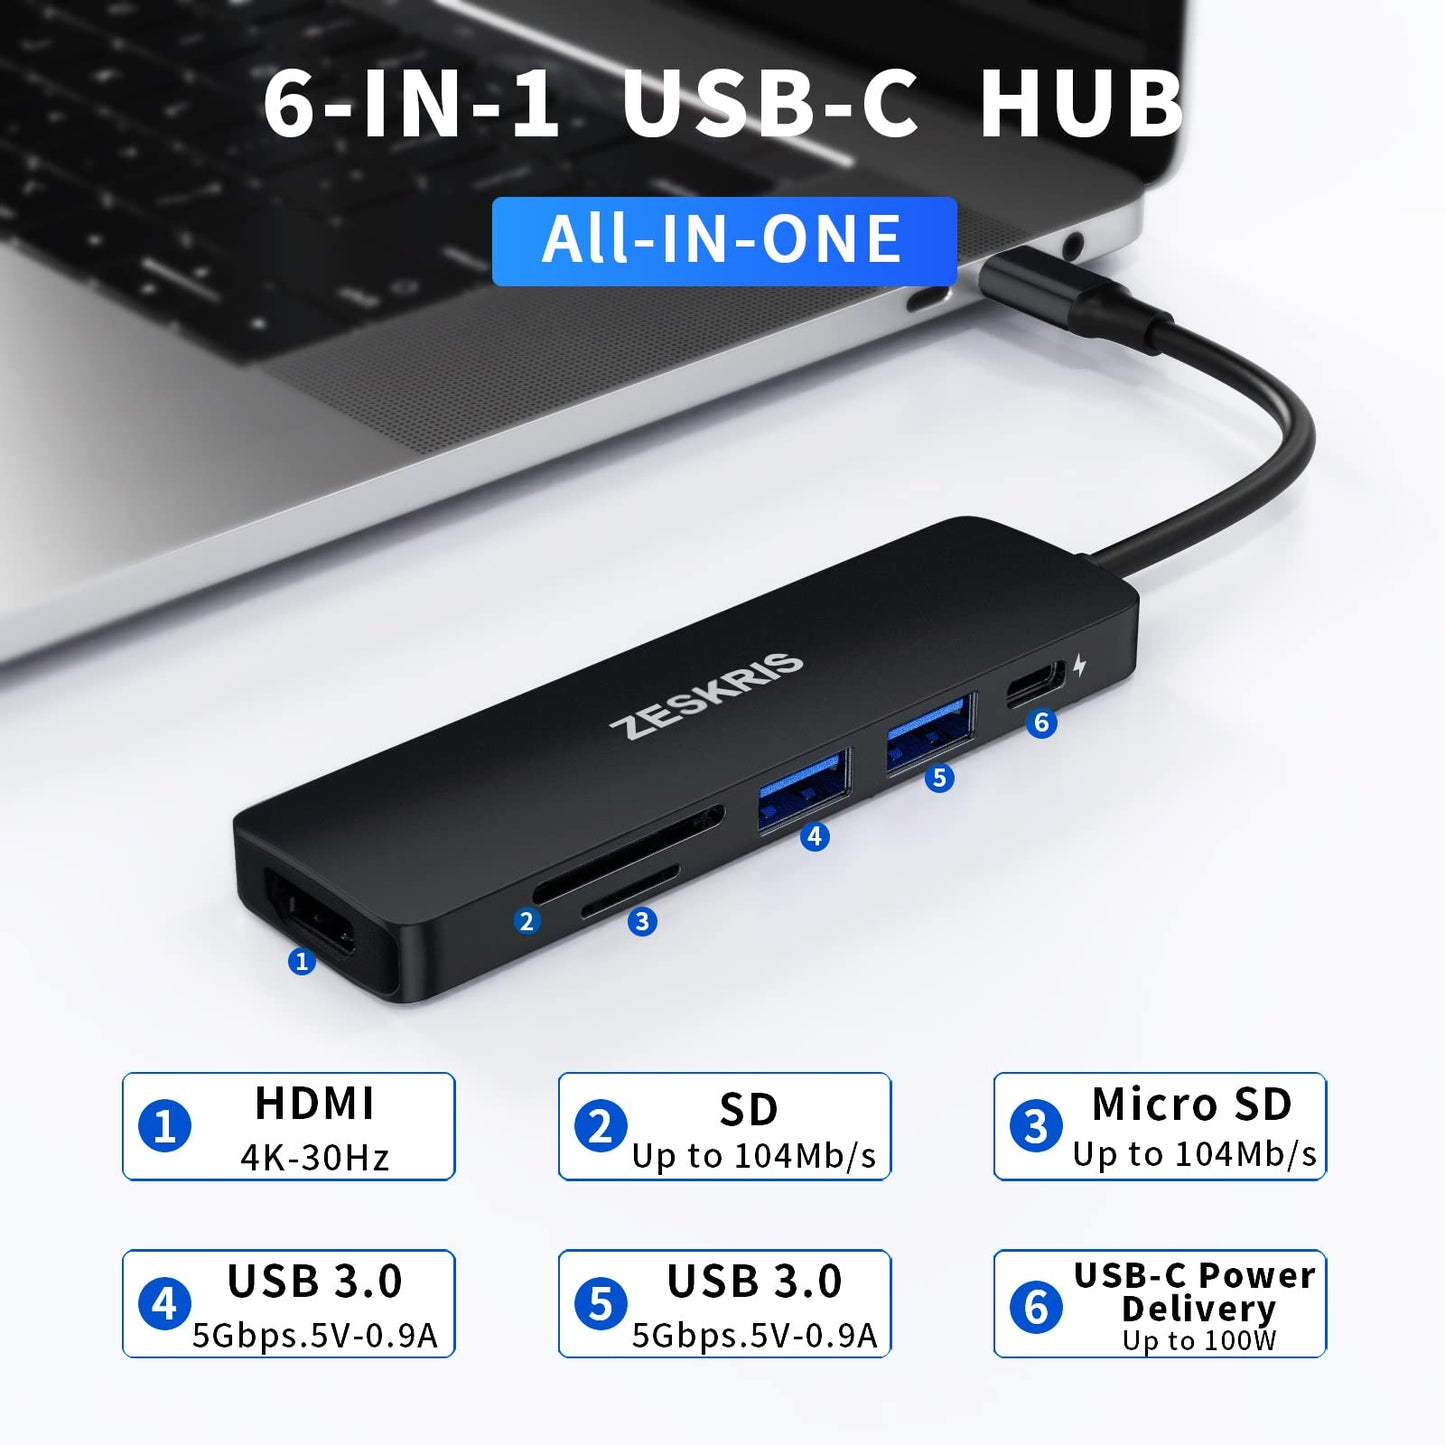 USB C Hub, ZESKRIS 5 Ports Ultra Slim Data Type C Hub with 1 USB 3.0, 2 USB 2.0, TF/SD/MicroSD Card Reader Portable USB Splitter for Macbook Pro/Air, Laptop, PS5/PS4, and Other Type C Devices